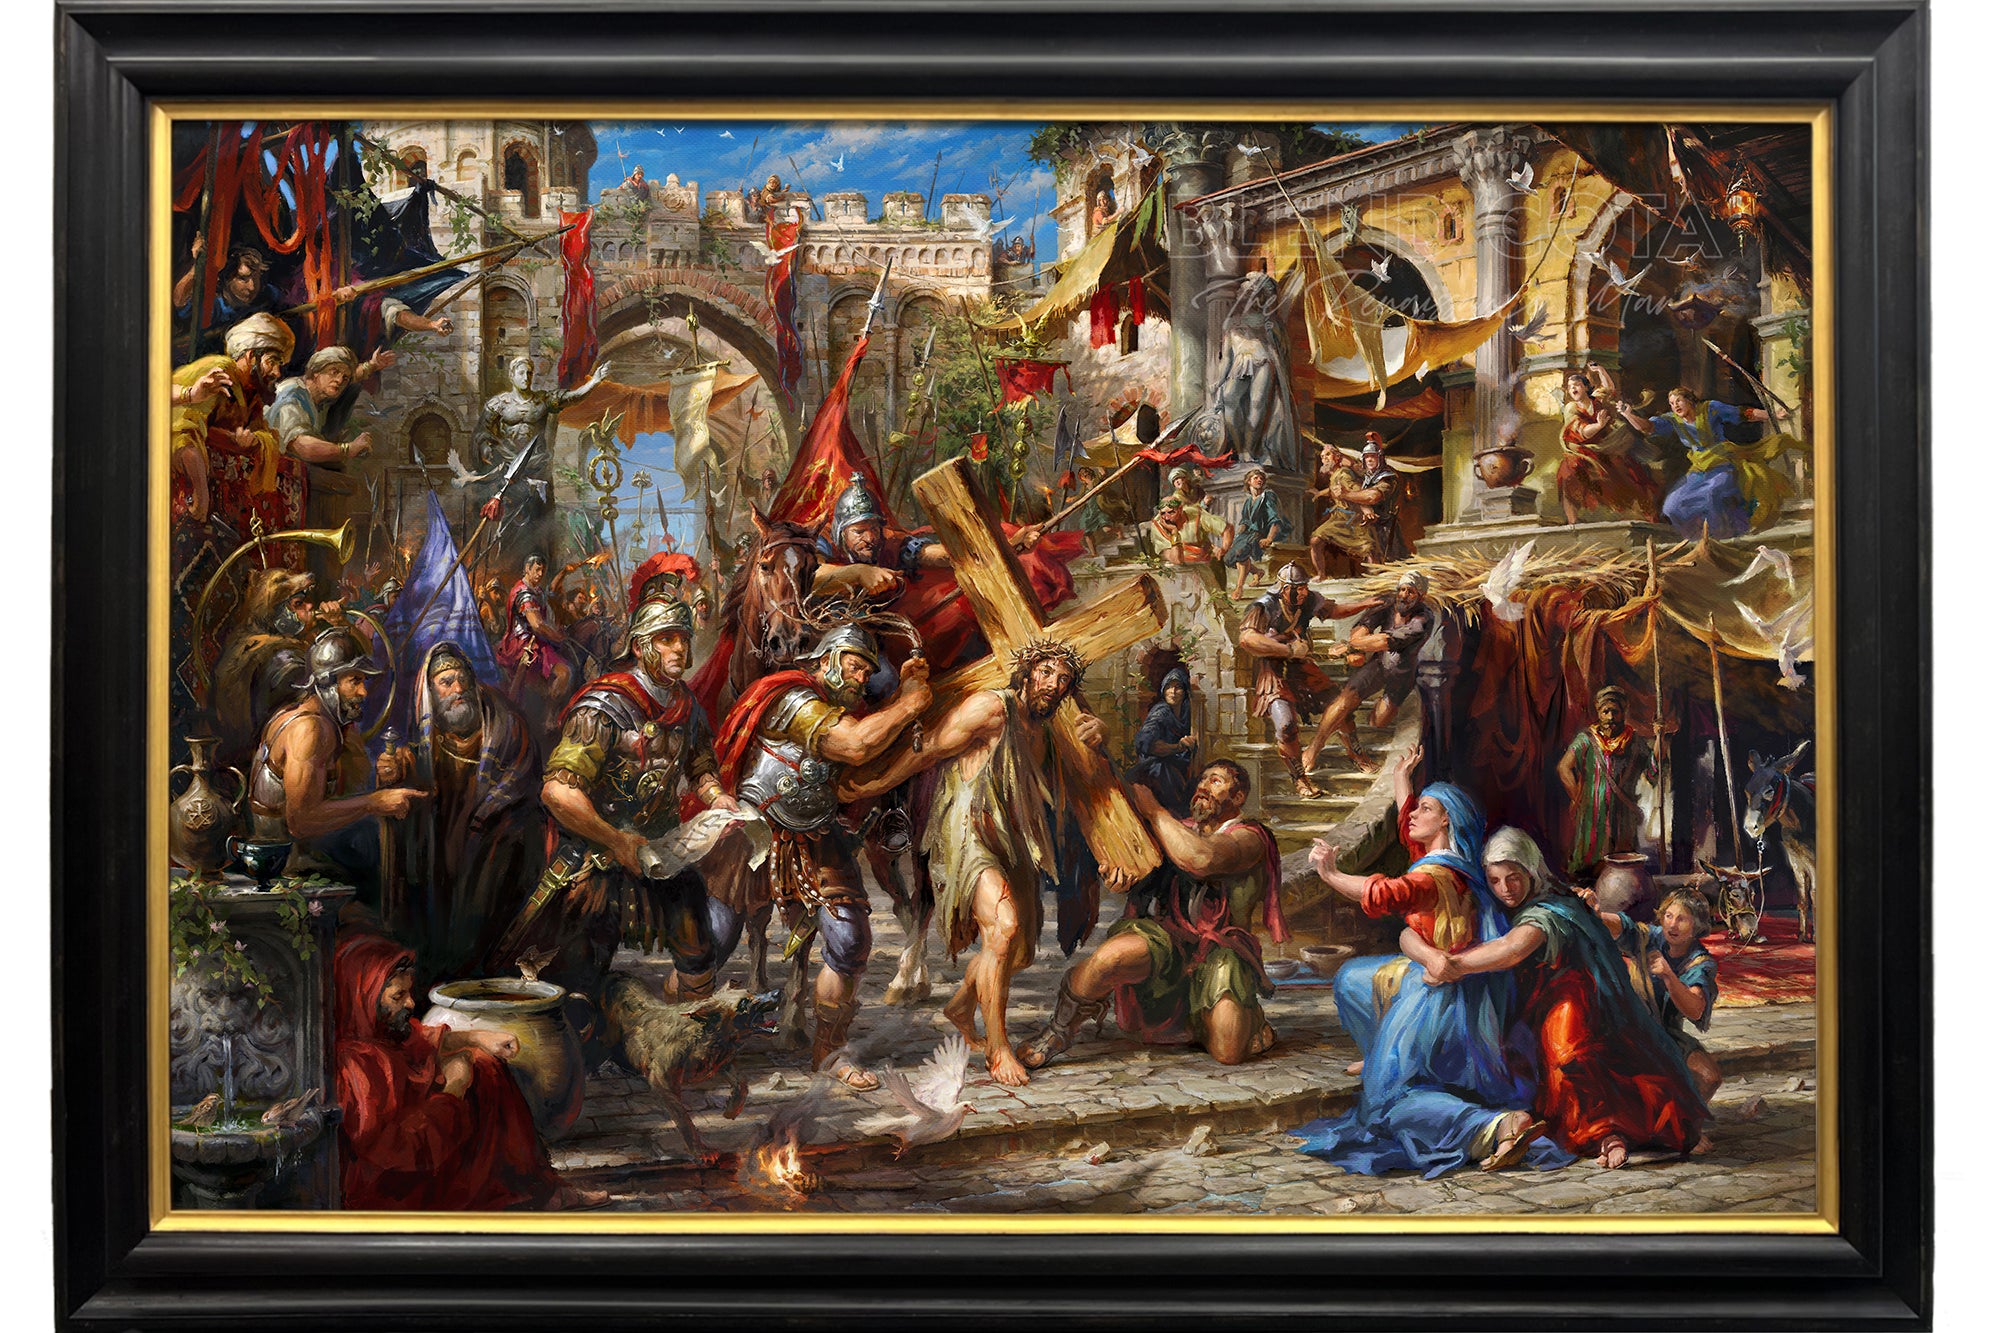 The Way of Love | Jesus Carrying His Cross - Blend Cota Original Oil Painting Framed on Canvas - Blend Cota Studios - Black and gold frame